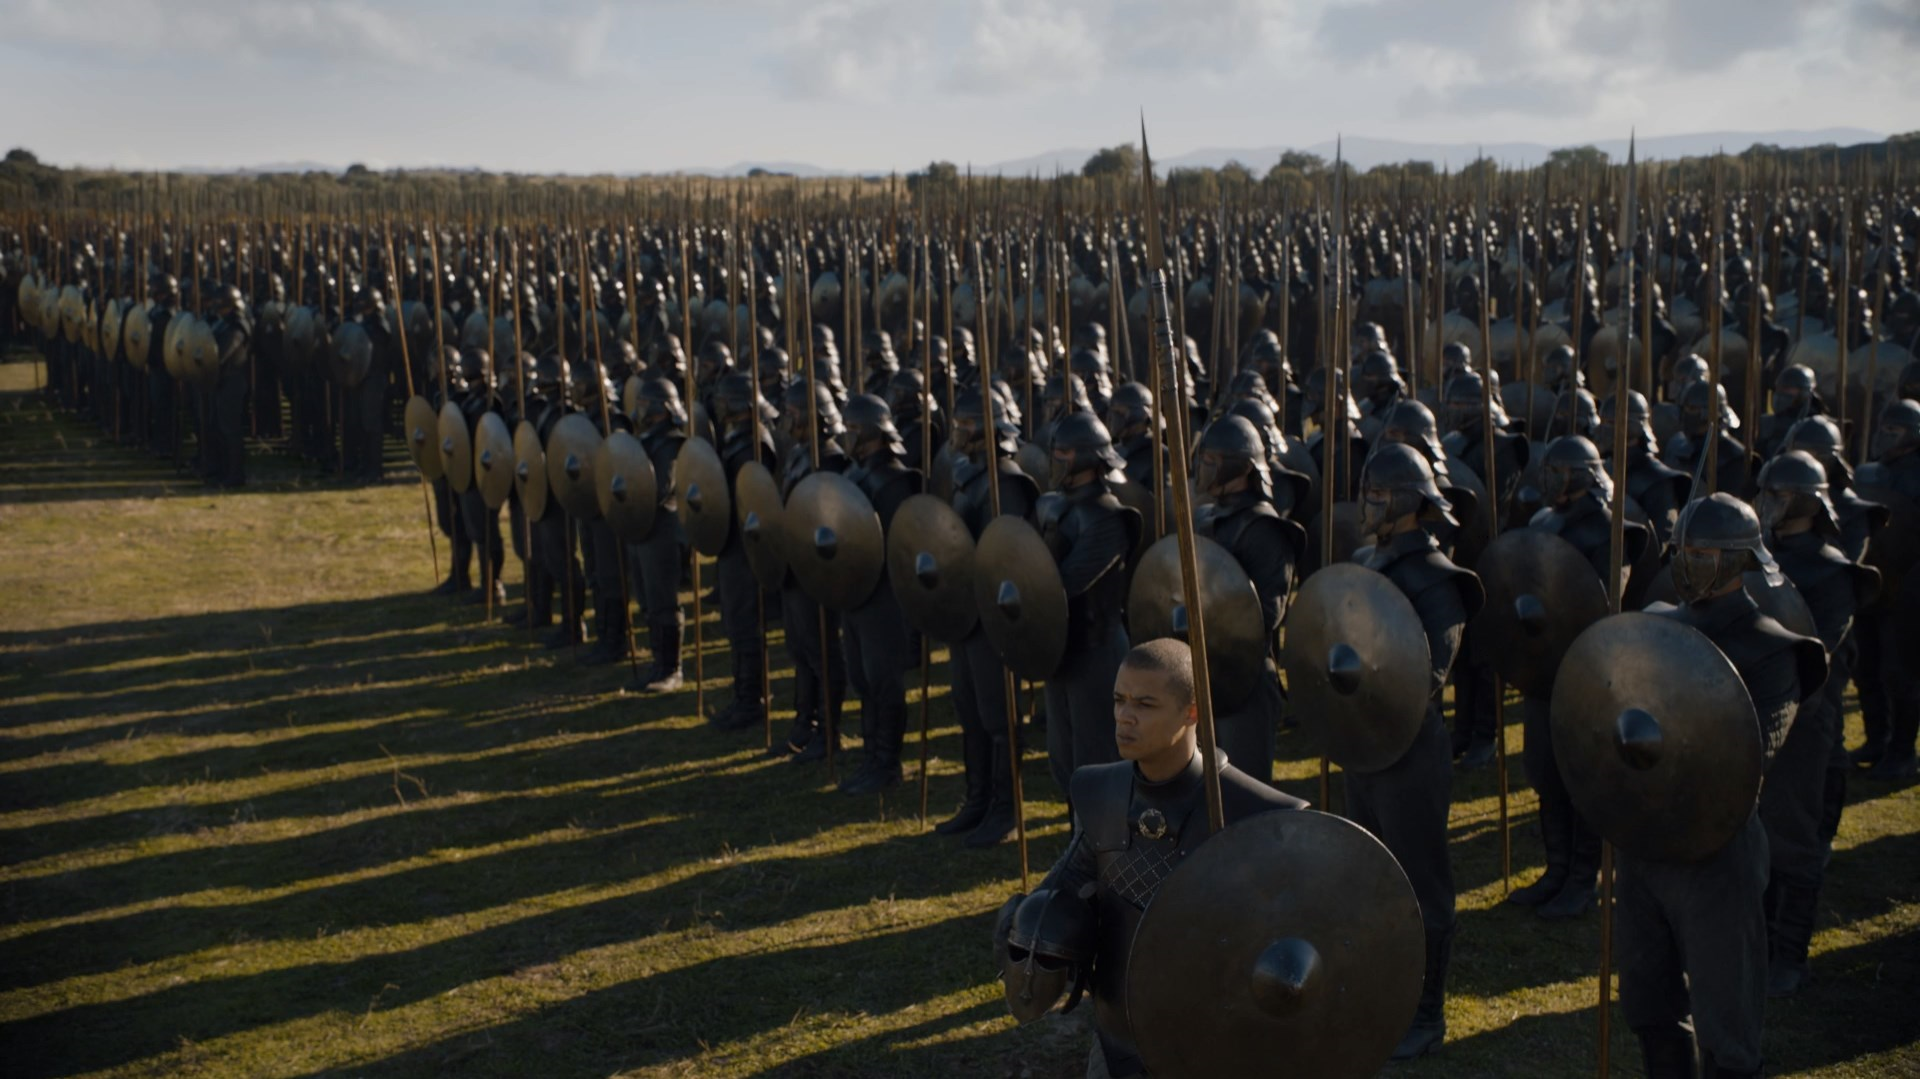 Unsullied | Game of Thrones Wiki | FANDOM powered by Wikia